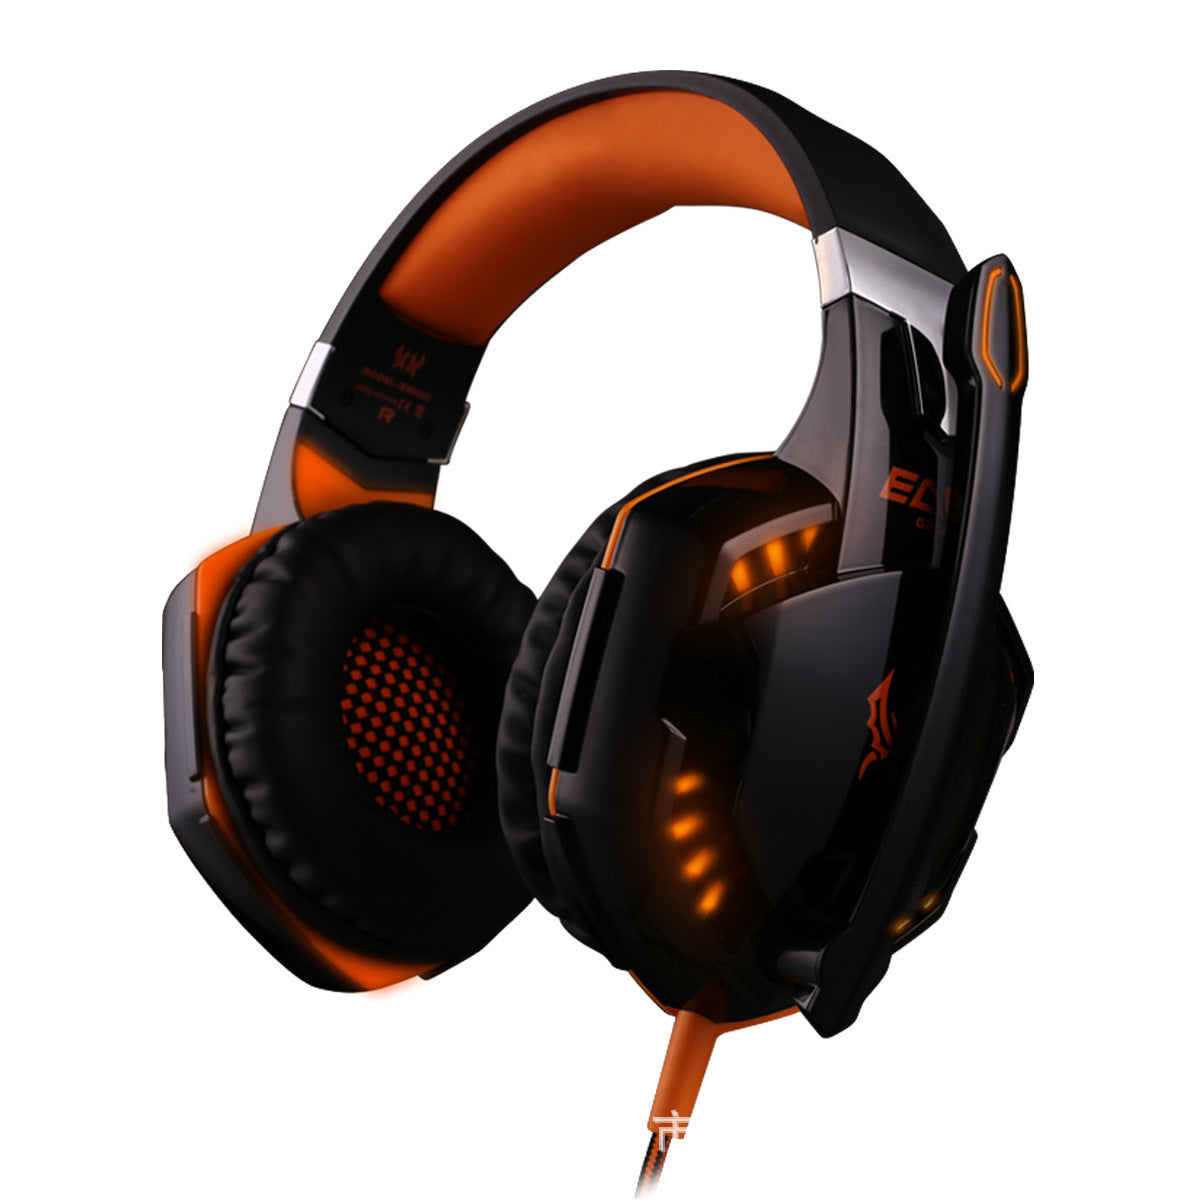 Head-Mounted Heavy Bass Gaming Headset With Microphone Noise Reduction